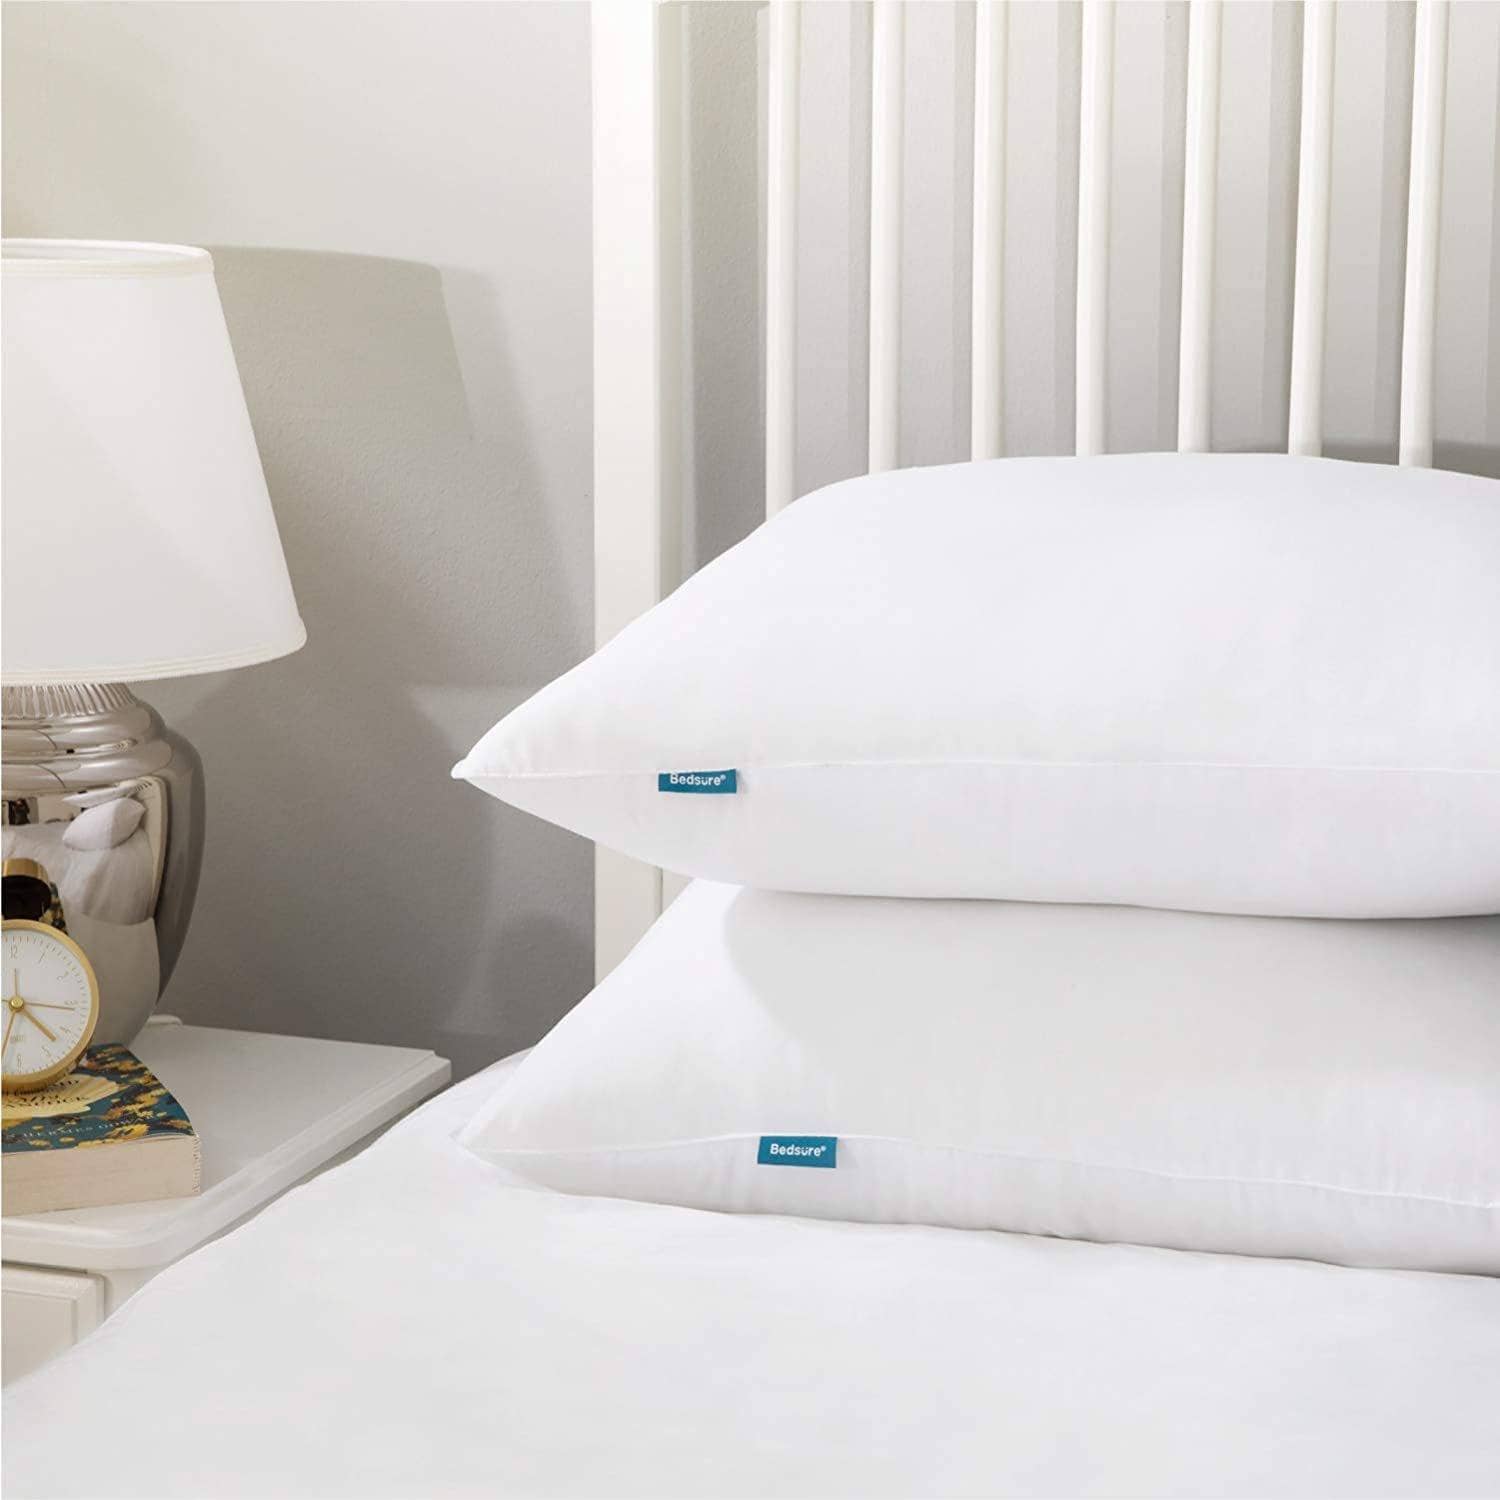 King Size Luxury Hotel Collection Bed Pillows Super Large Pillows - 20x36  (Pack of 2) - Extra Large Size, Super Fluffy Filling, Premium Quality -  Soft